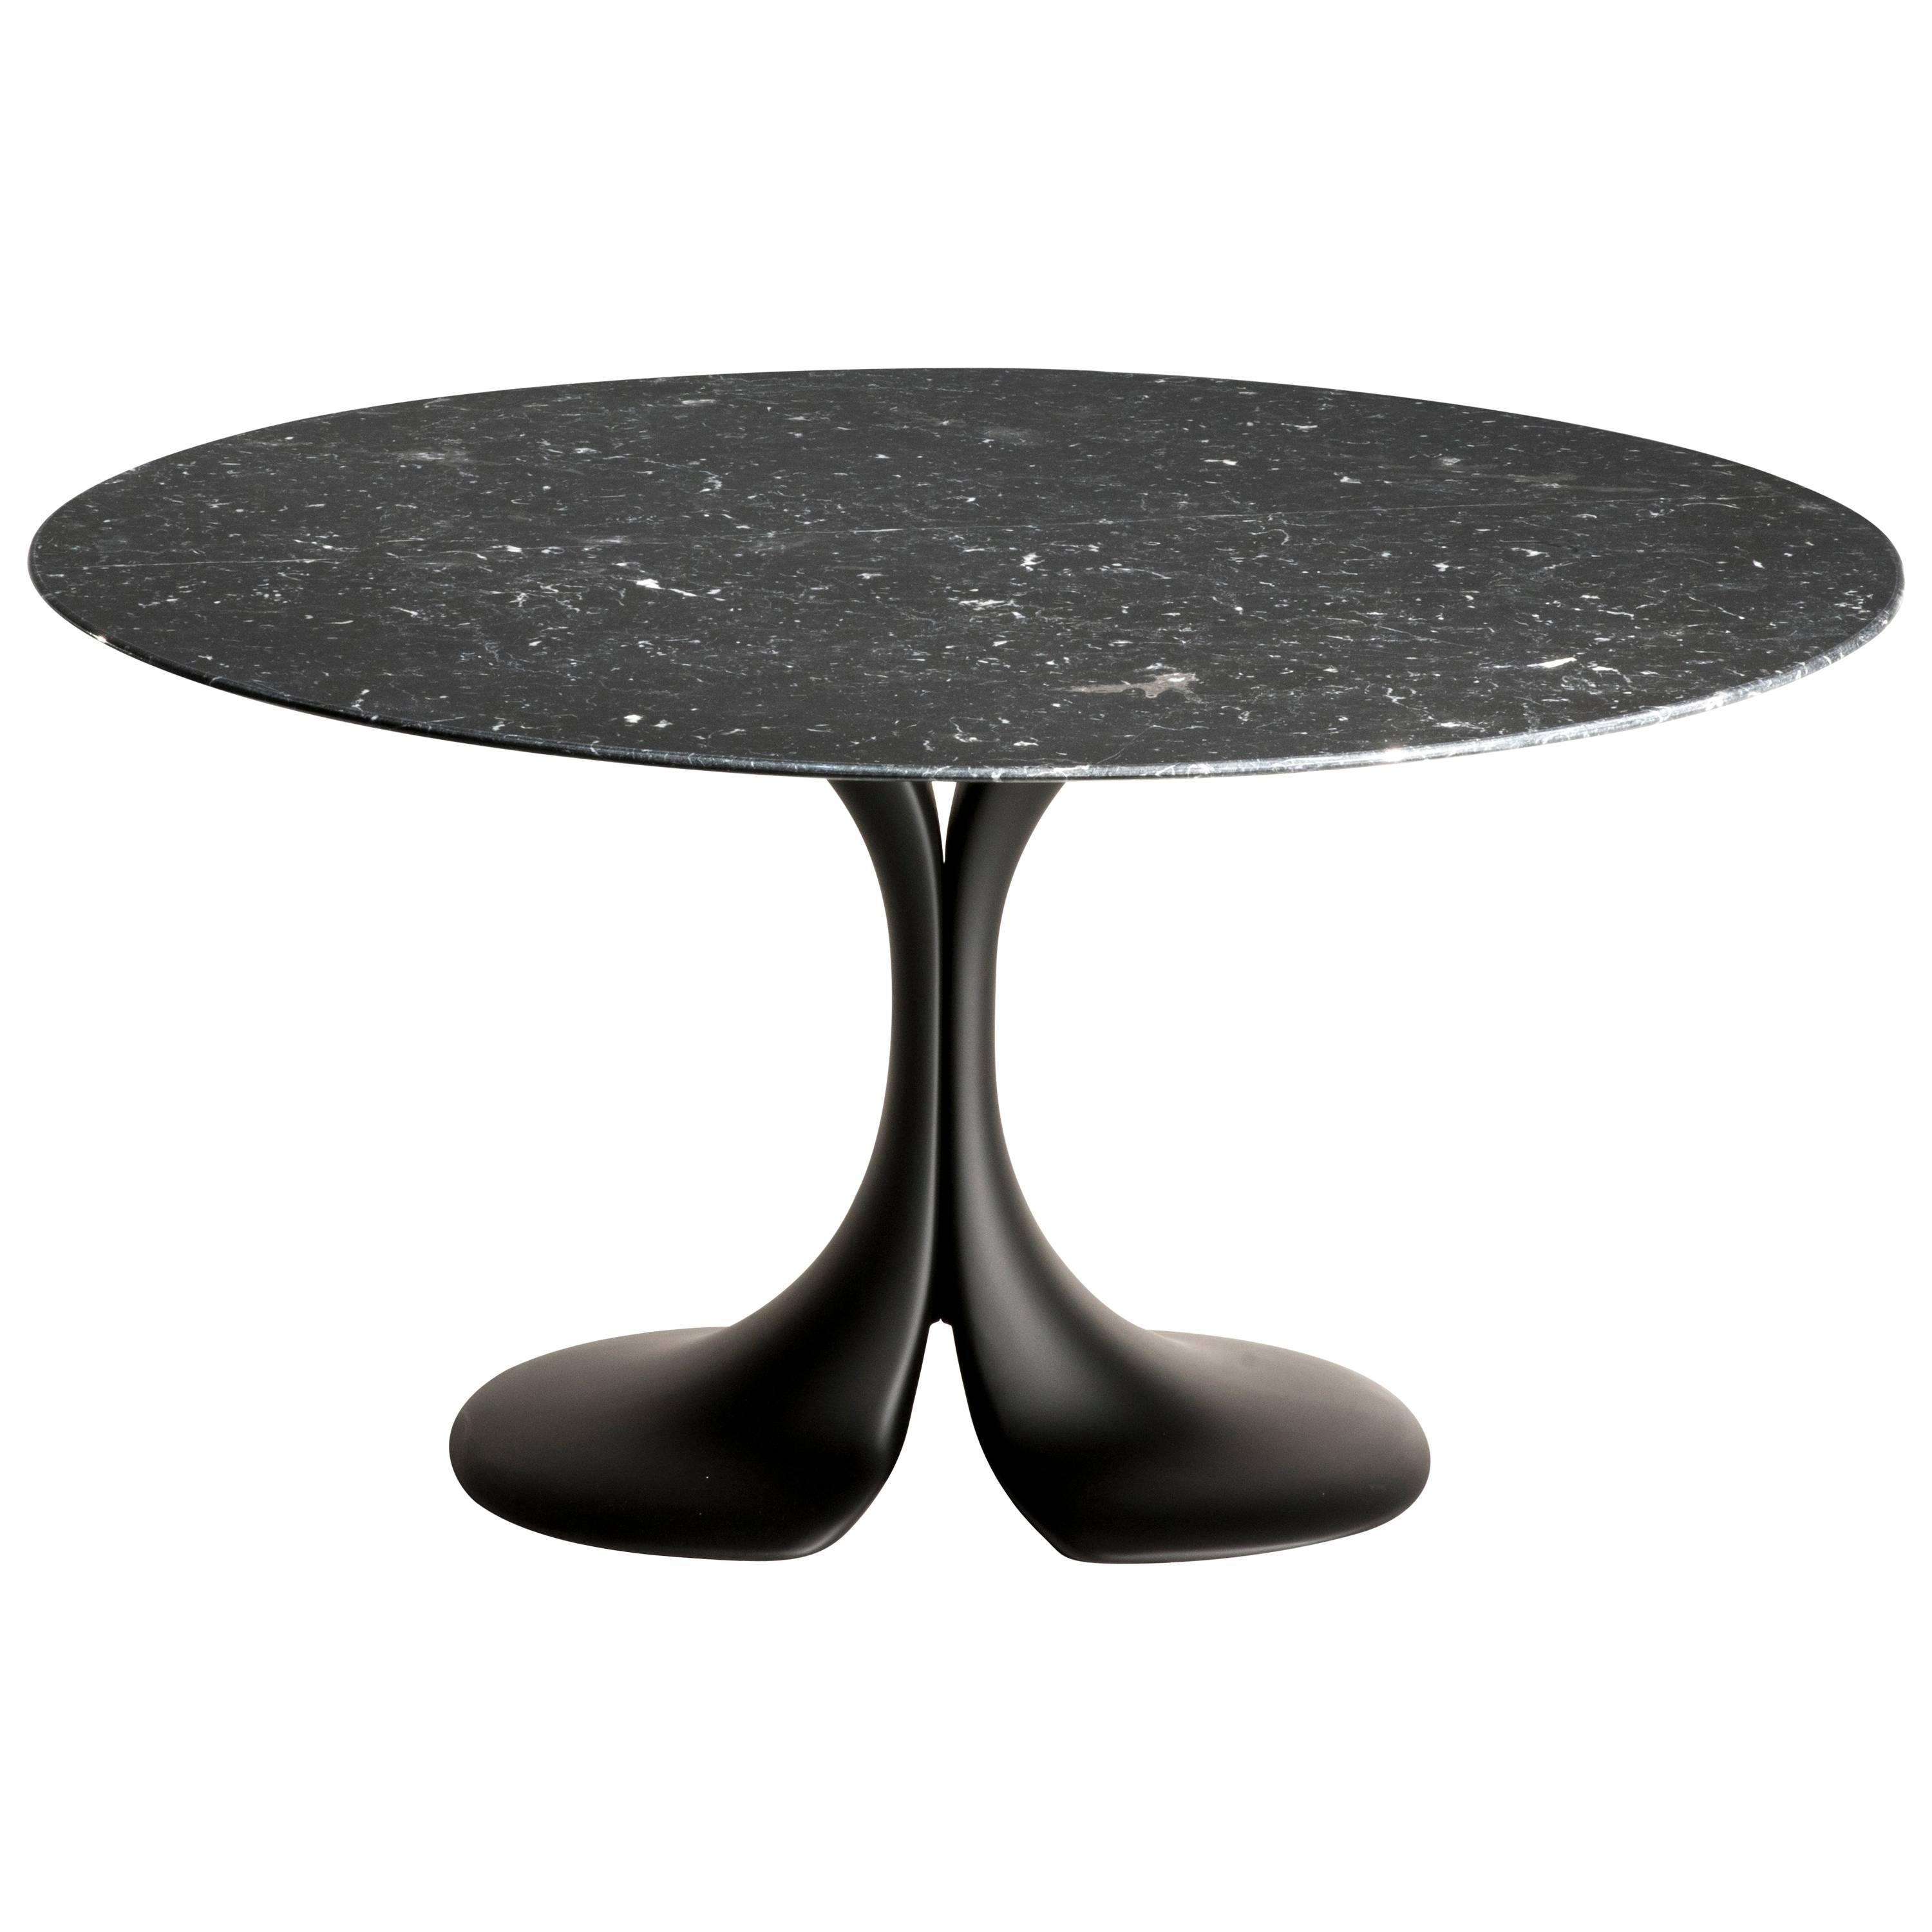 Didymos Round Table with Black Marble Top by Antonia Astori for Driade